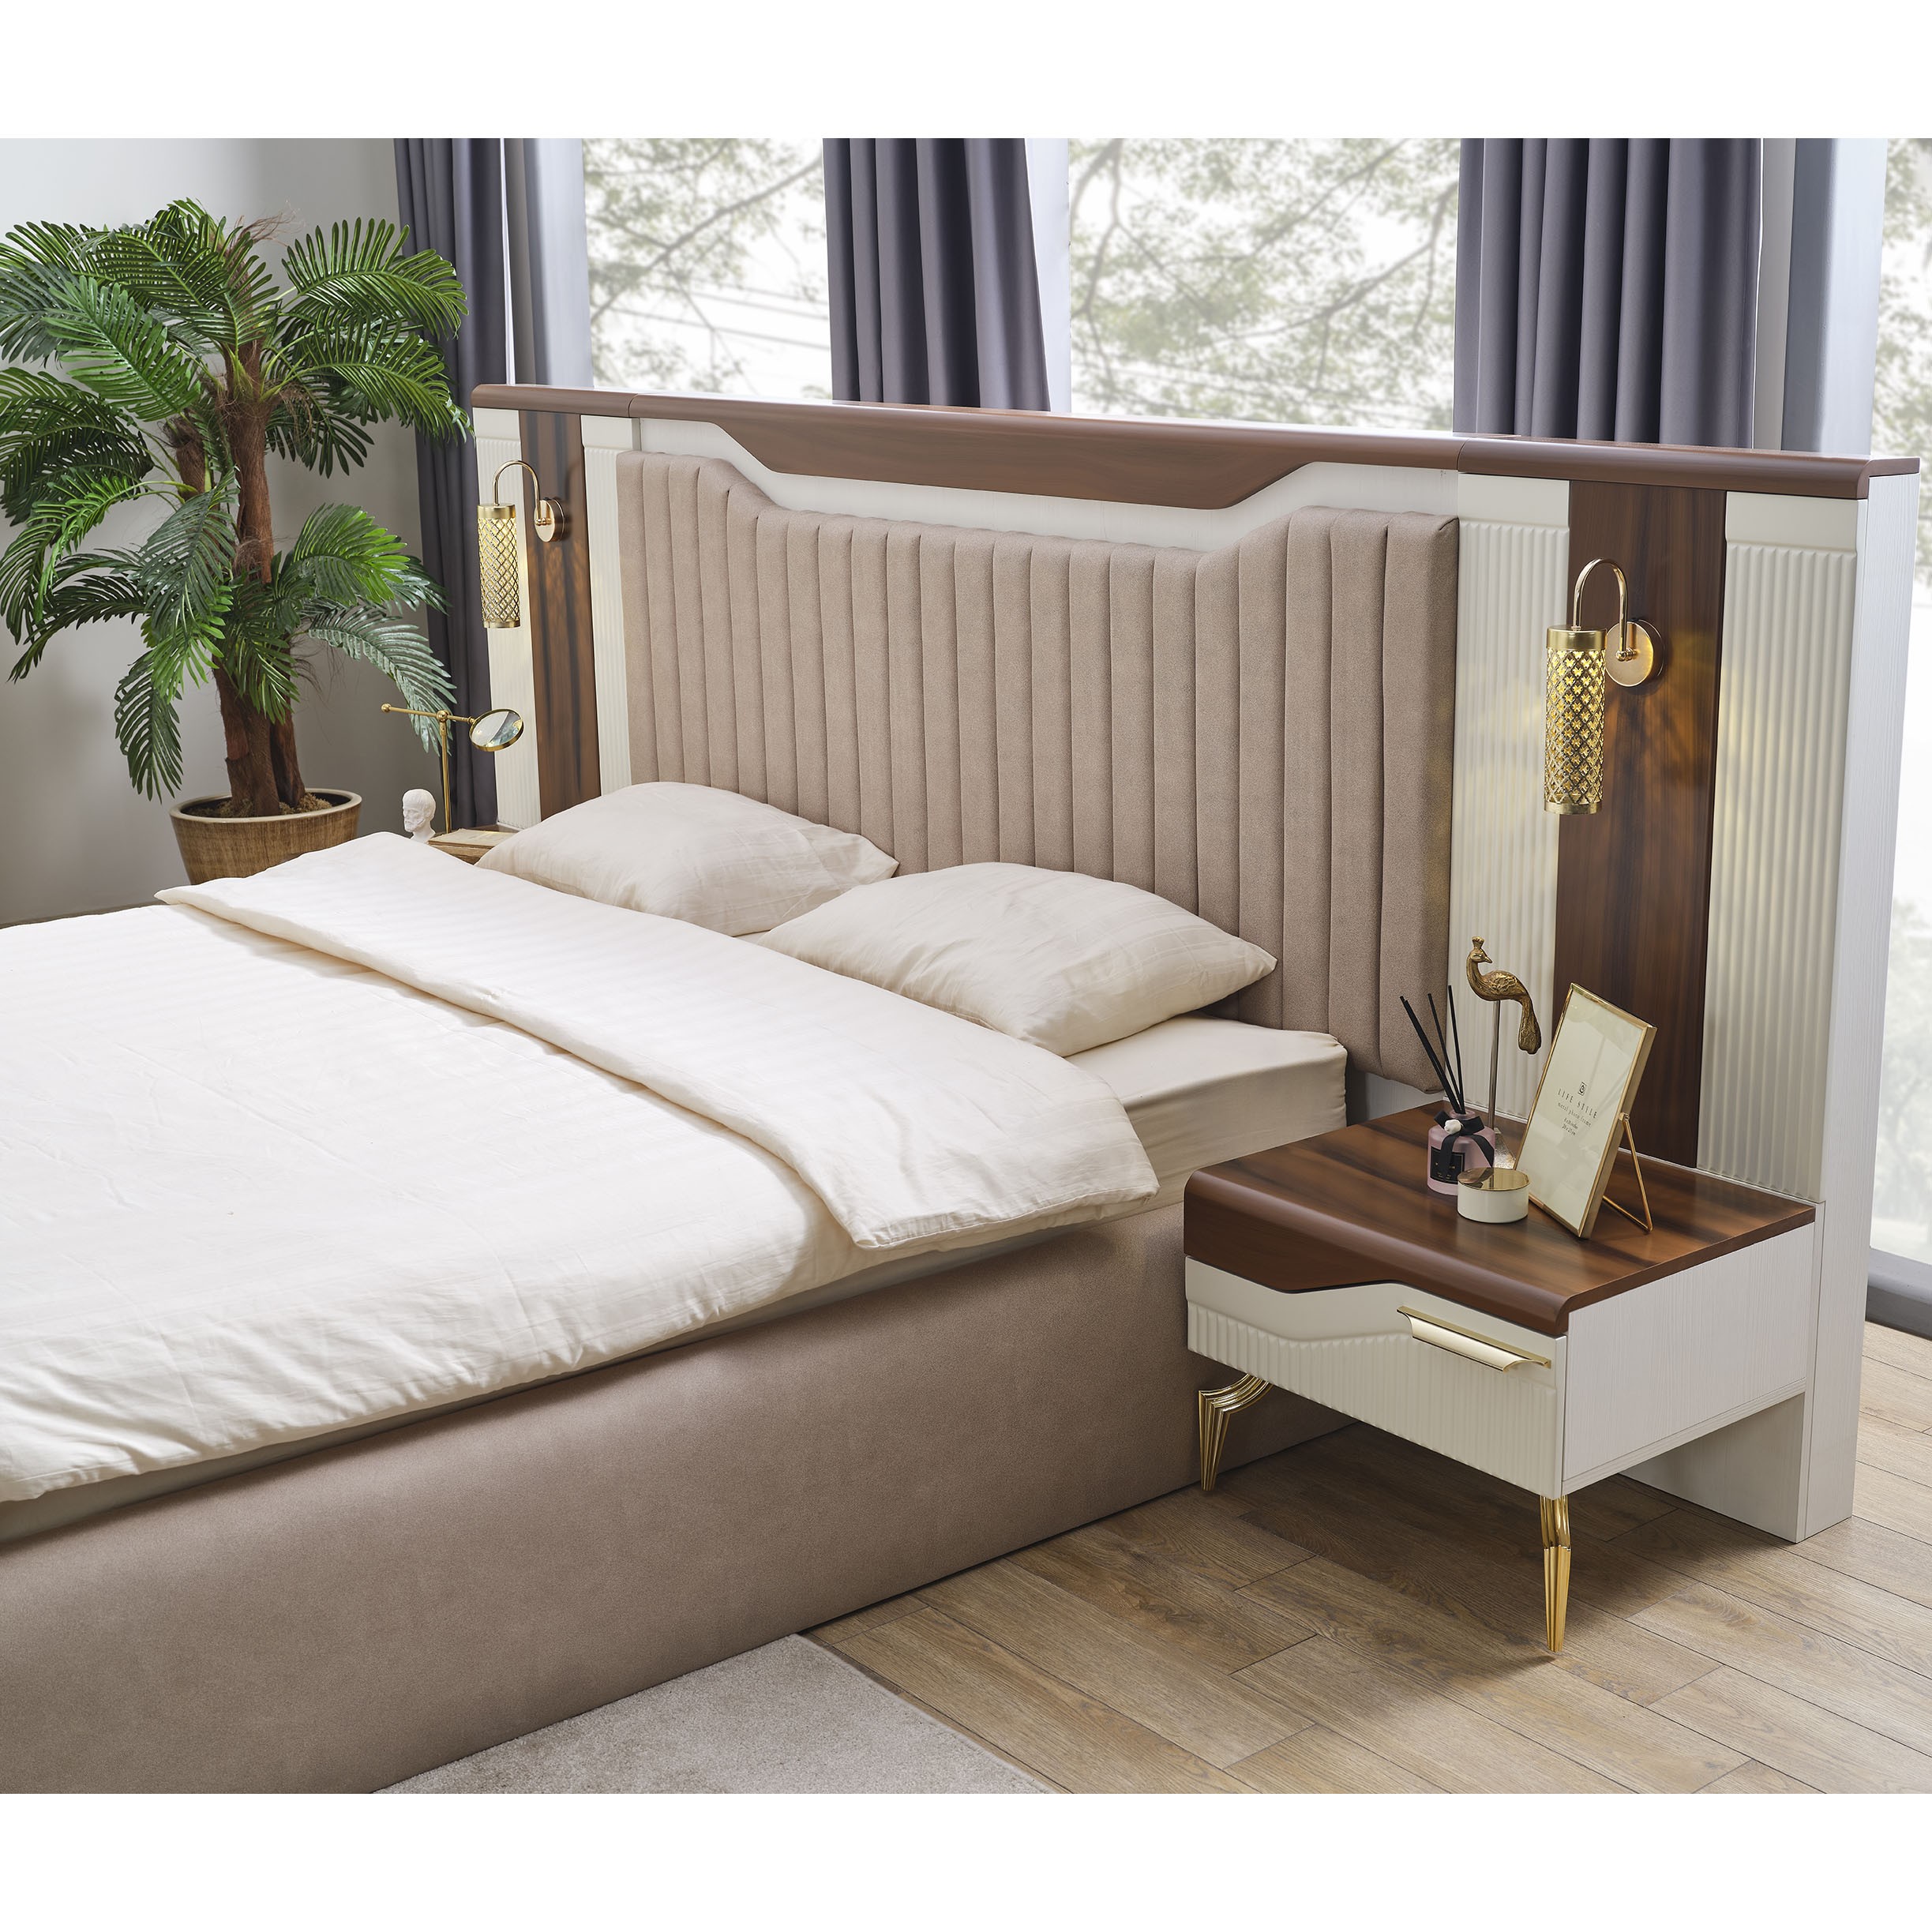 Style Hermes Vol1 Bed With Storage 160x200 cm